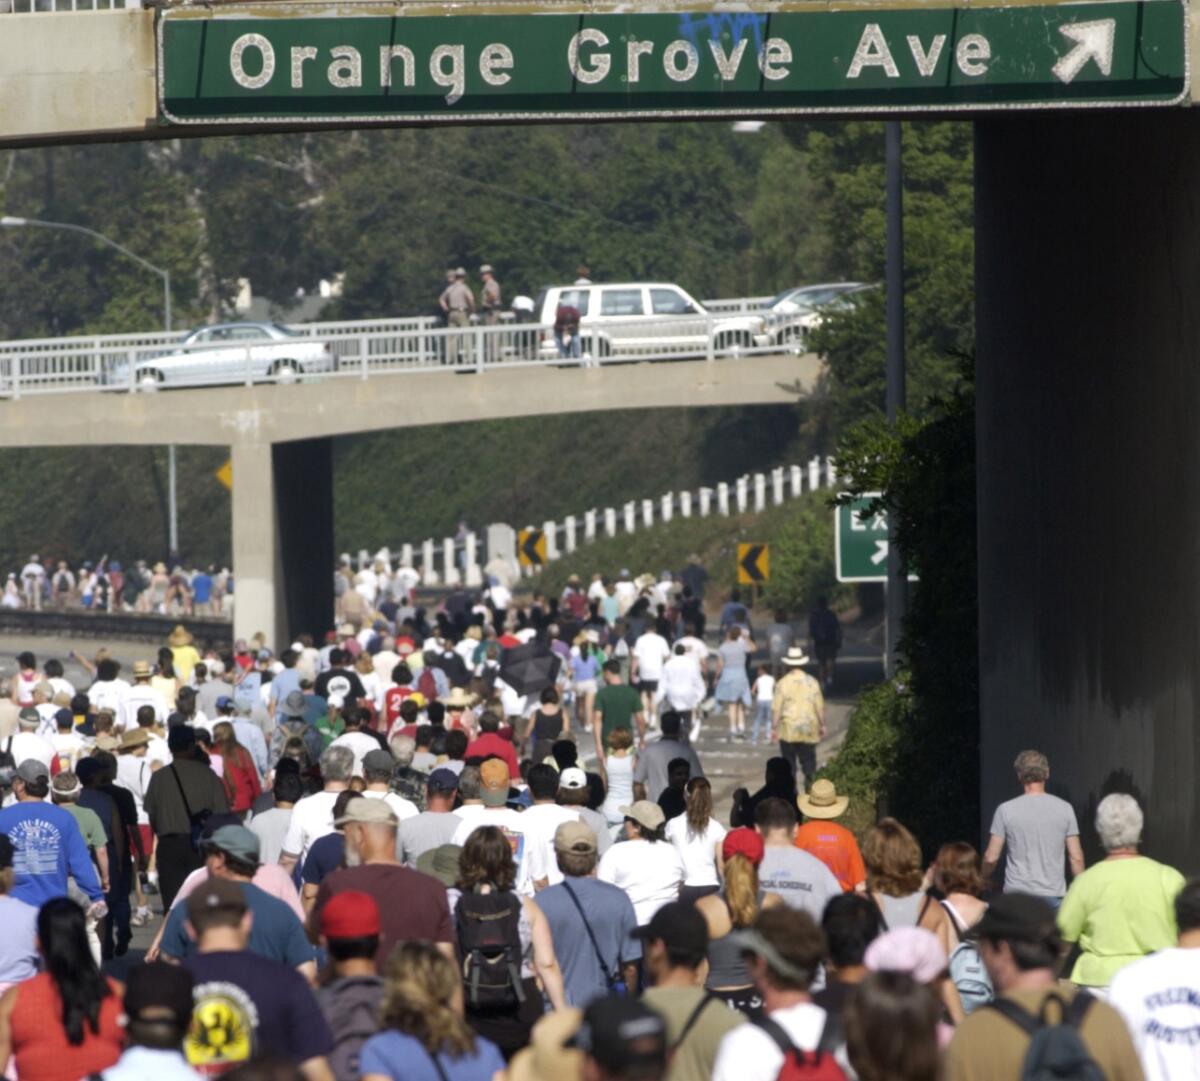 A large crowd of people walking on a freeway under a sign for Orange Grove Avenue exit